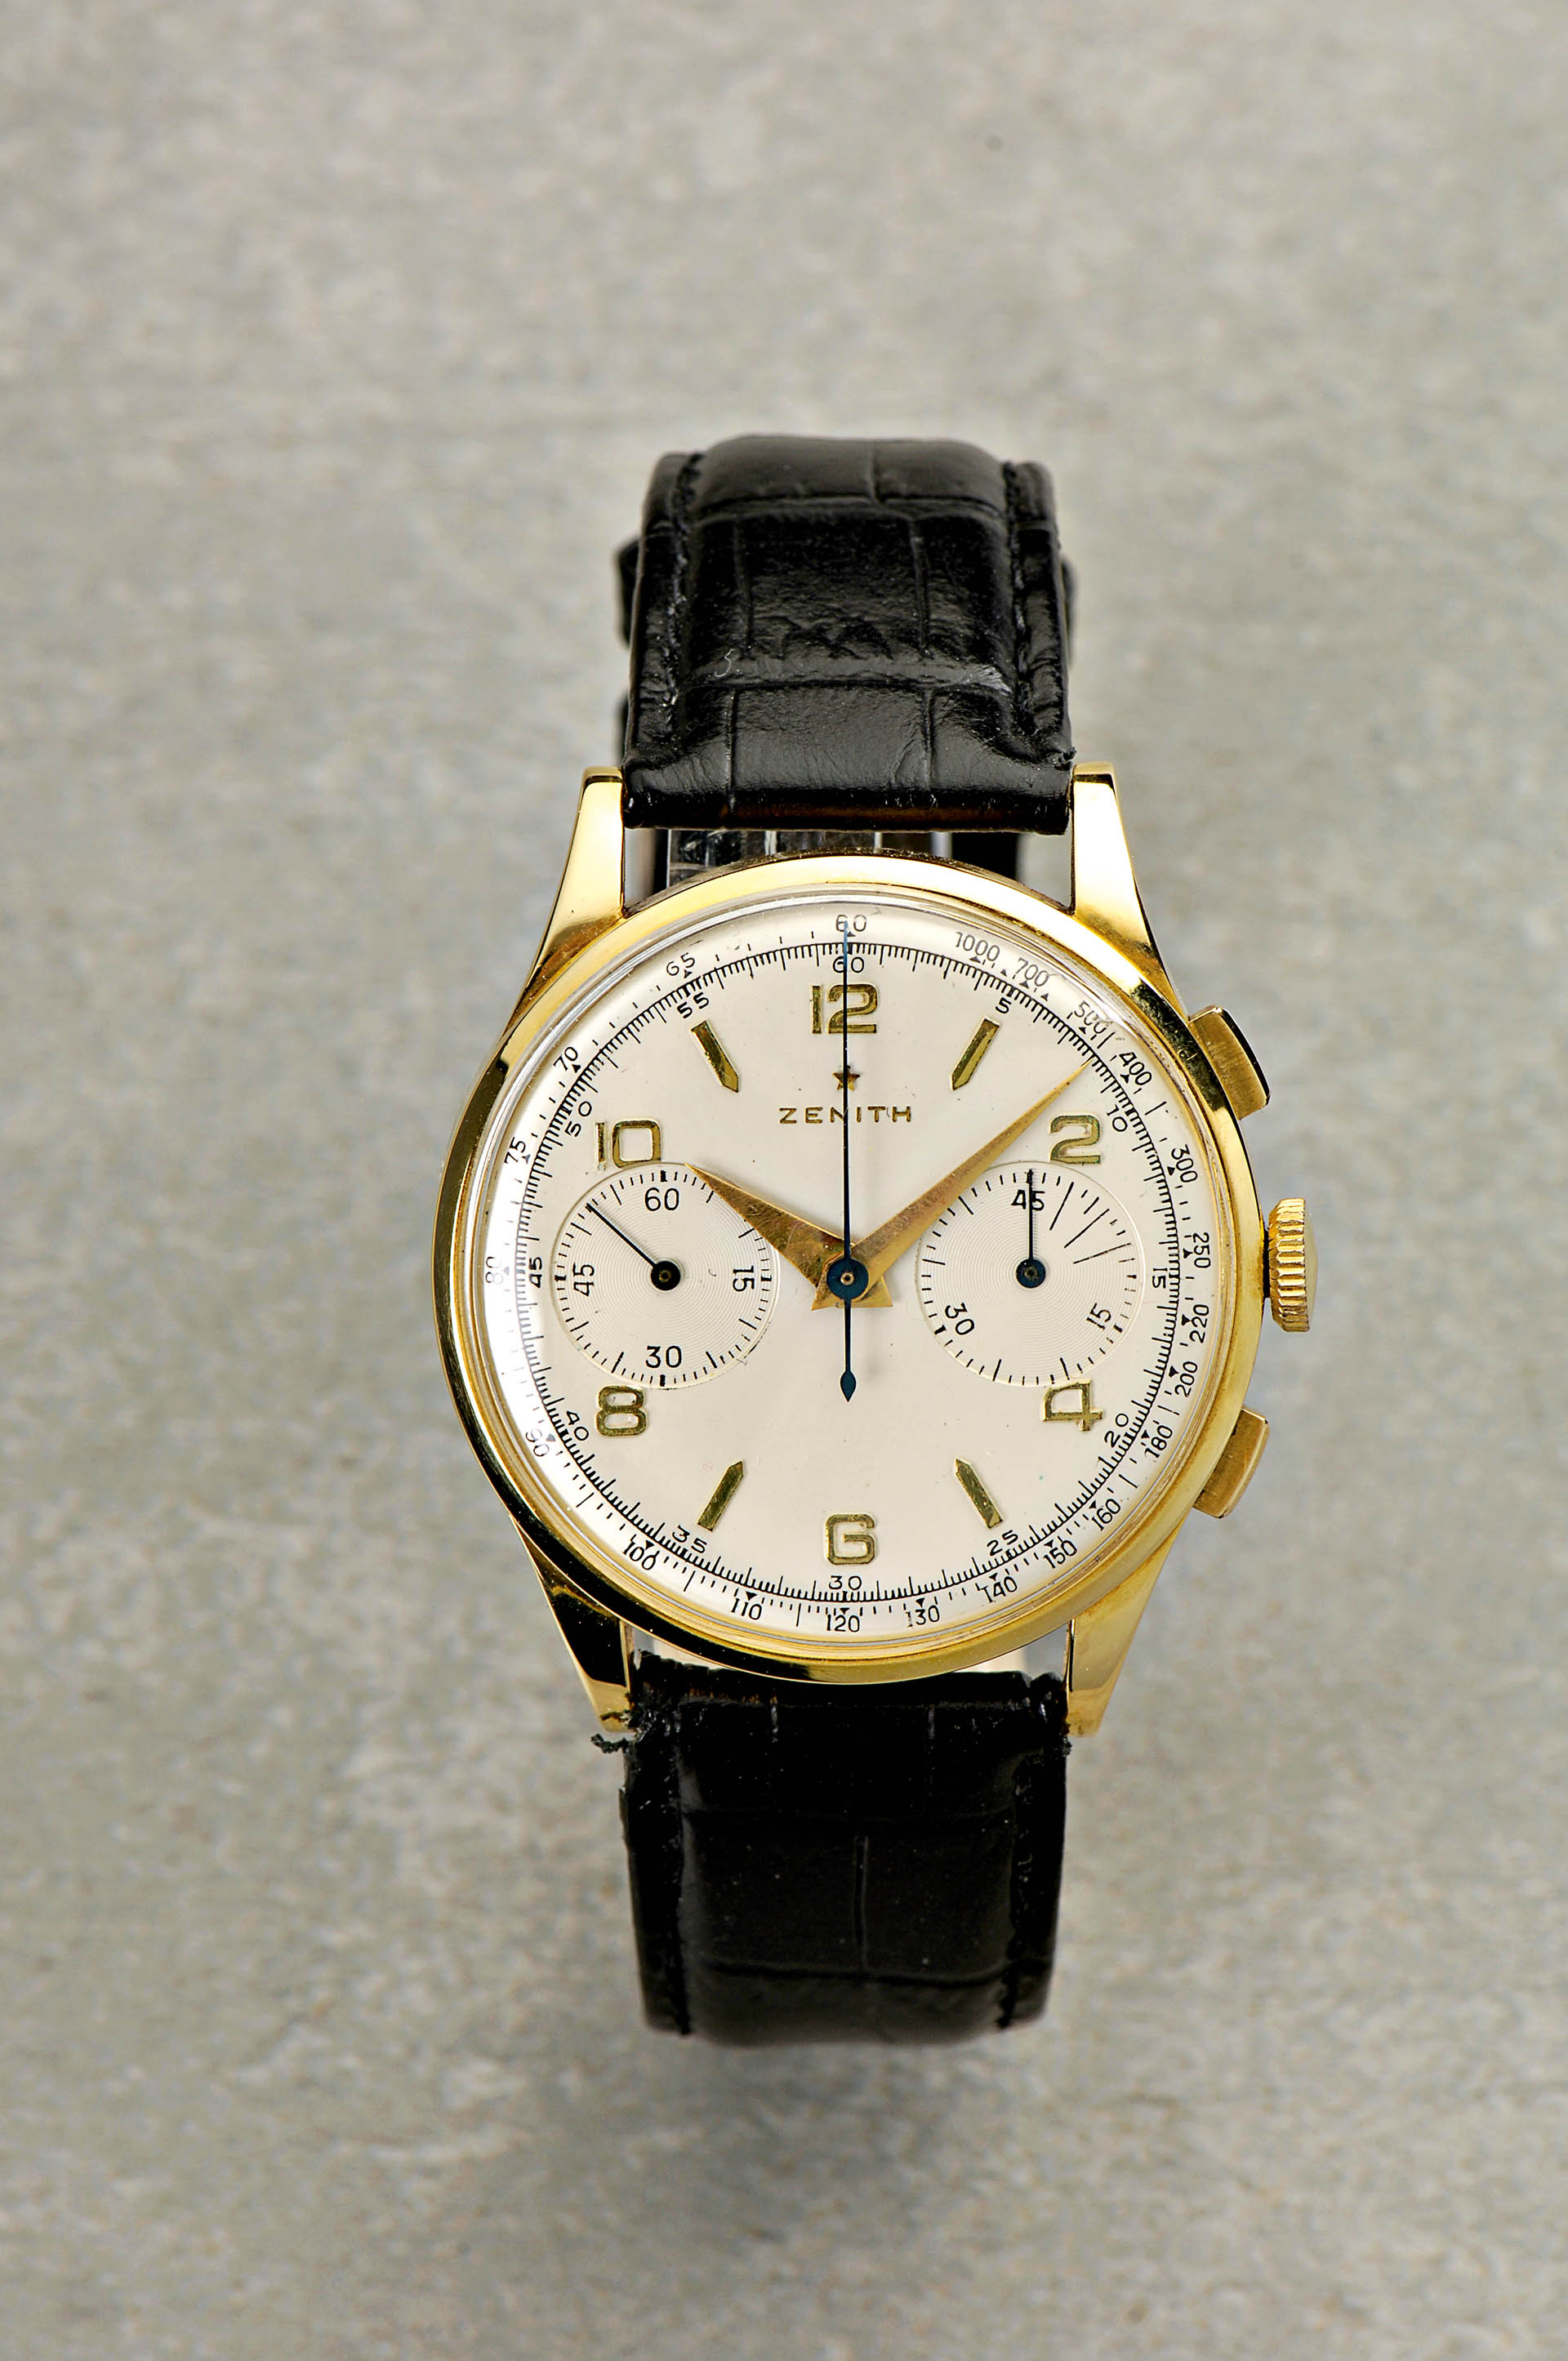 Zenith-Chronograph in Gold